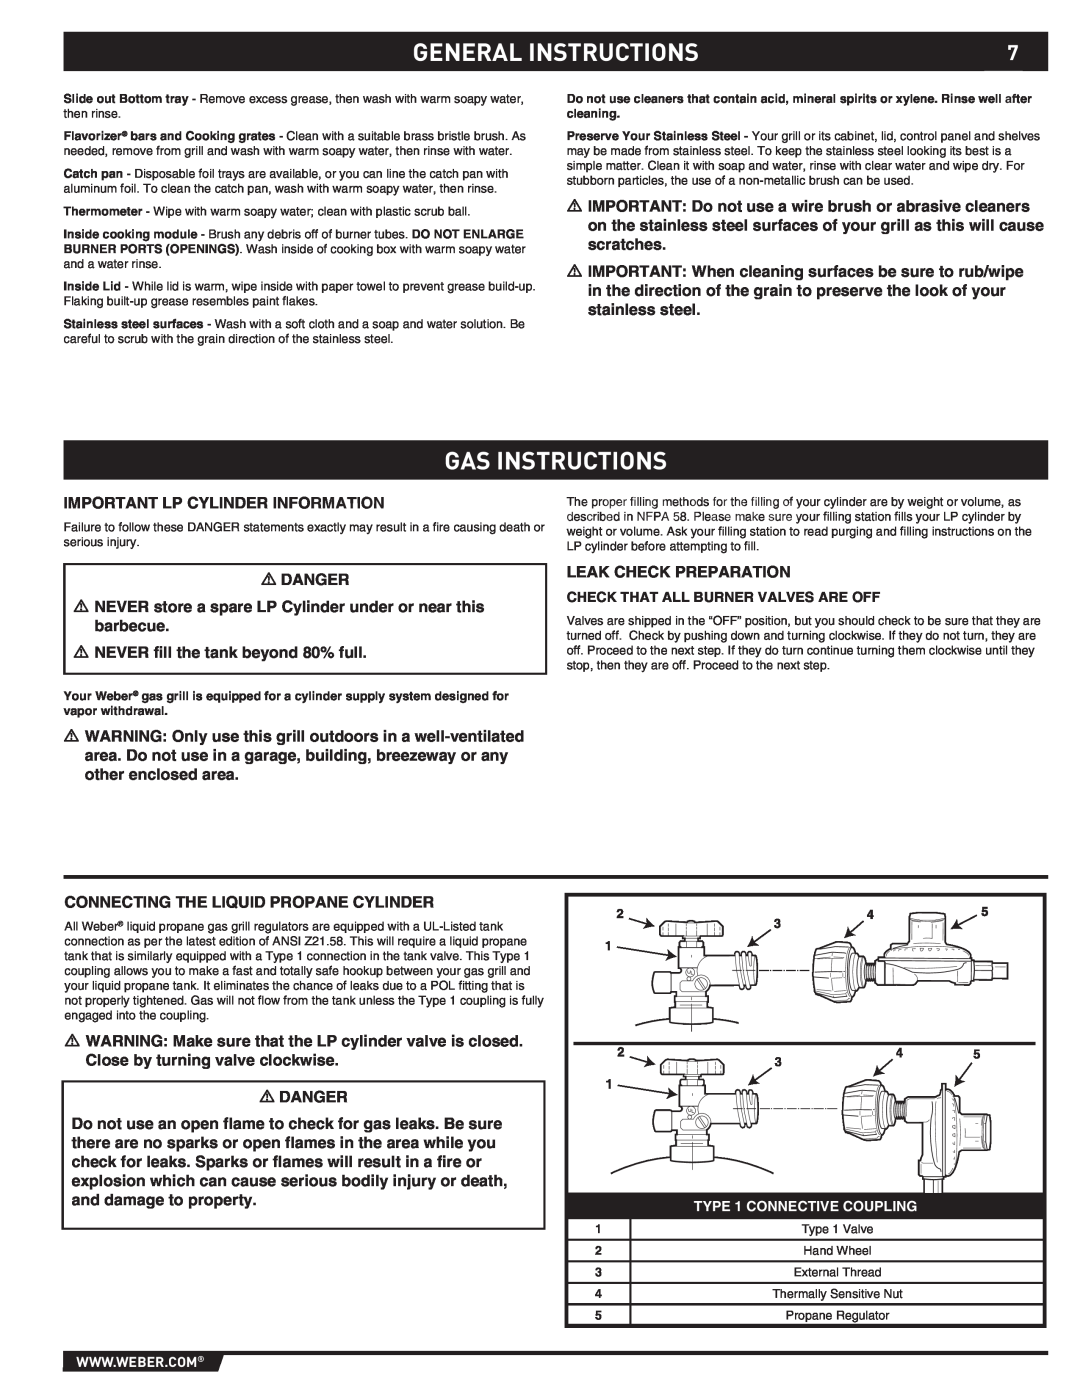 Weber S-460 manual Gas Instructions, General Instructions, Check That All Burner Valves Are Off, TYPE 1 CONNECTIVE COUPLING 